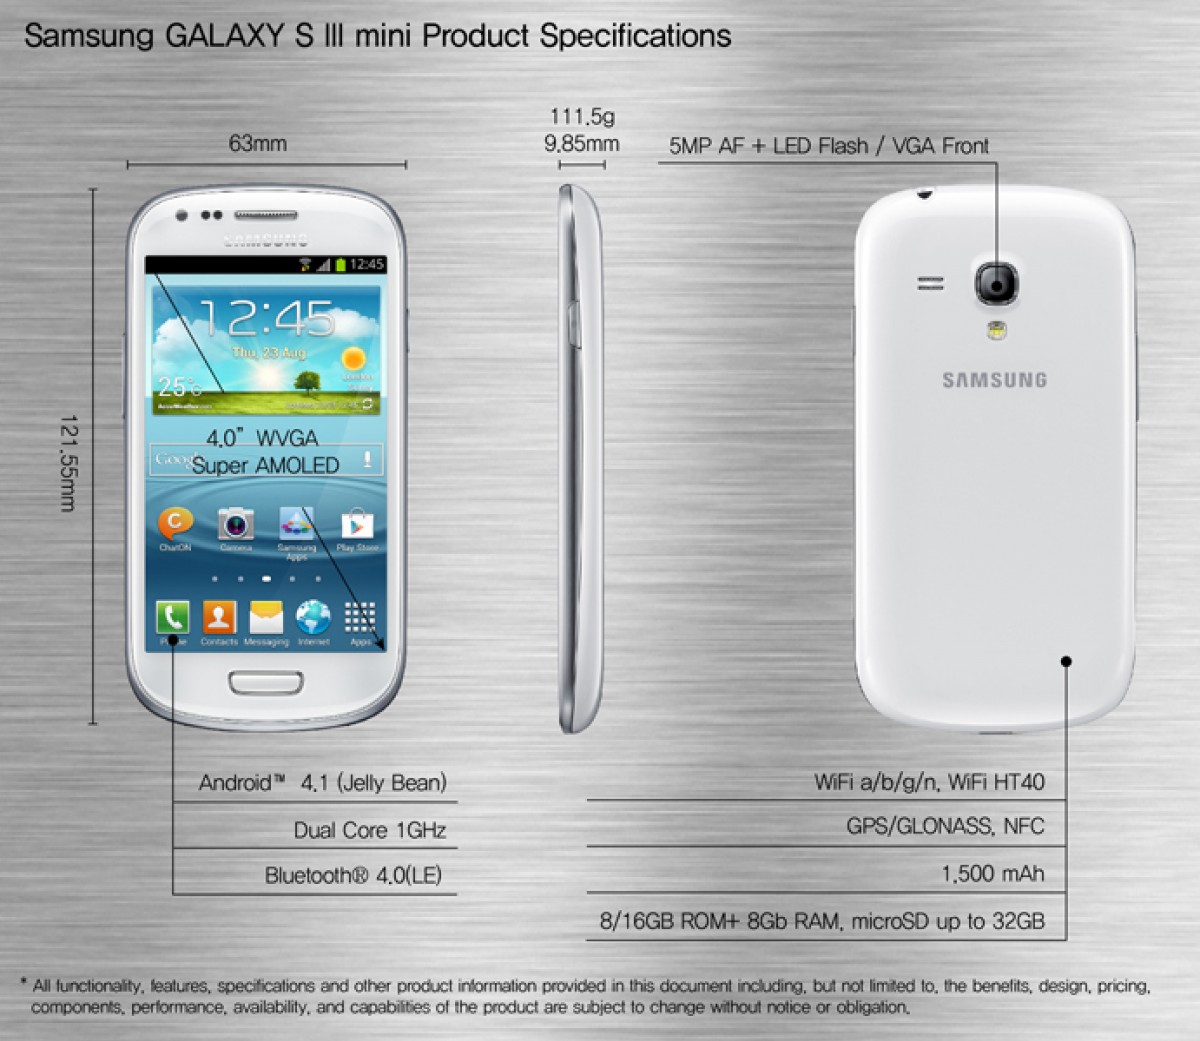 Flashback: Samsung's Galaxy S minis were small but hardly deserving of the S-branding